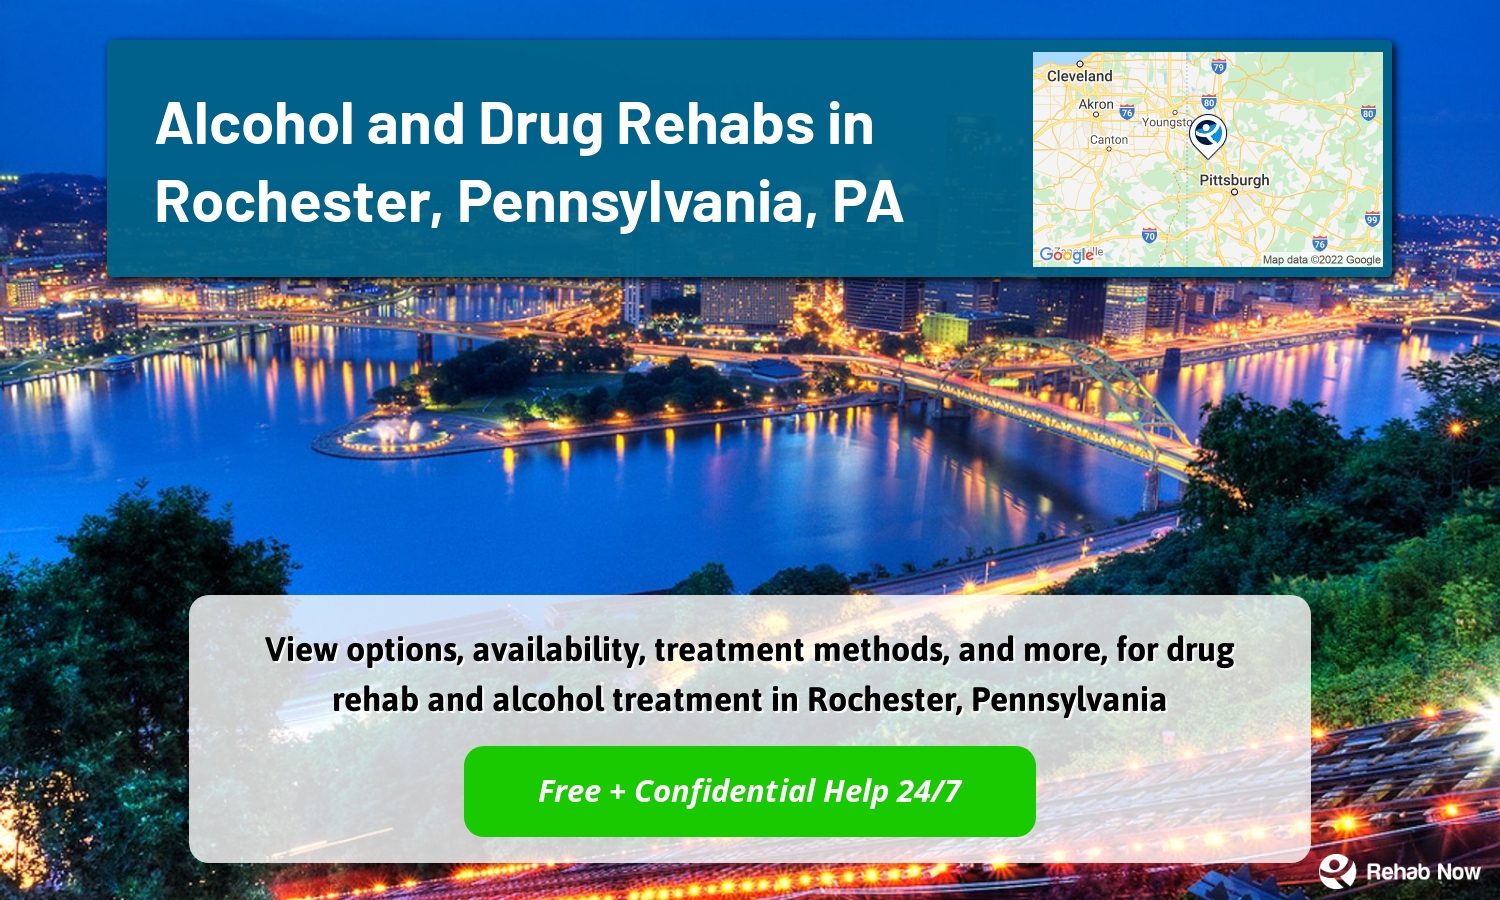 View options, availability, treatment methods, and more, for drug rehab and alcohol treatment in Rochester, Pennsylvania